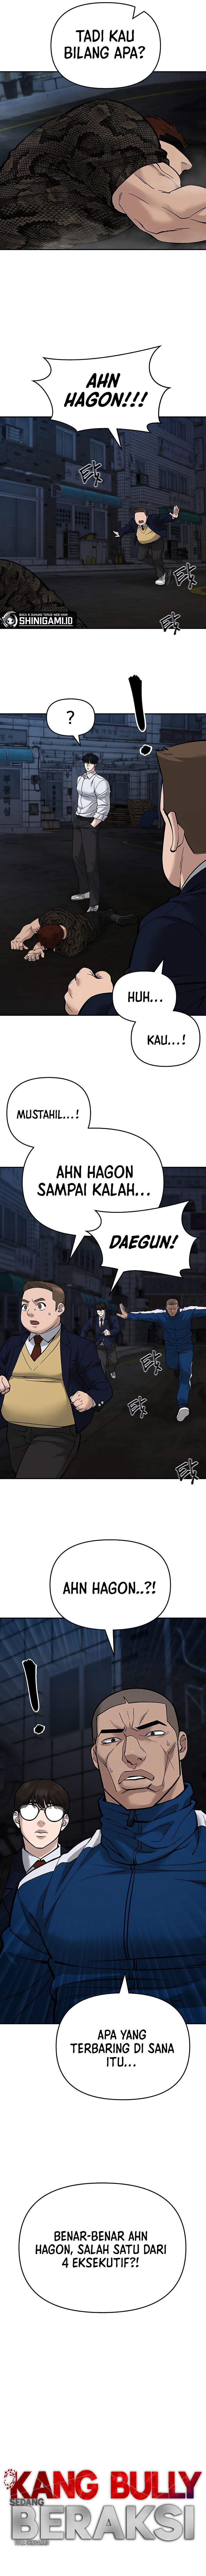 the-bully-in-charge Chapter 61